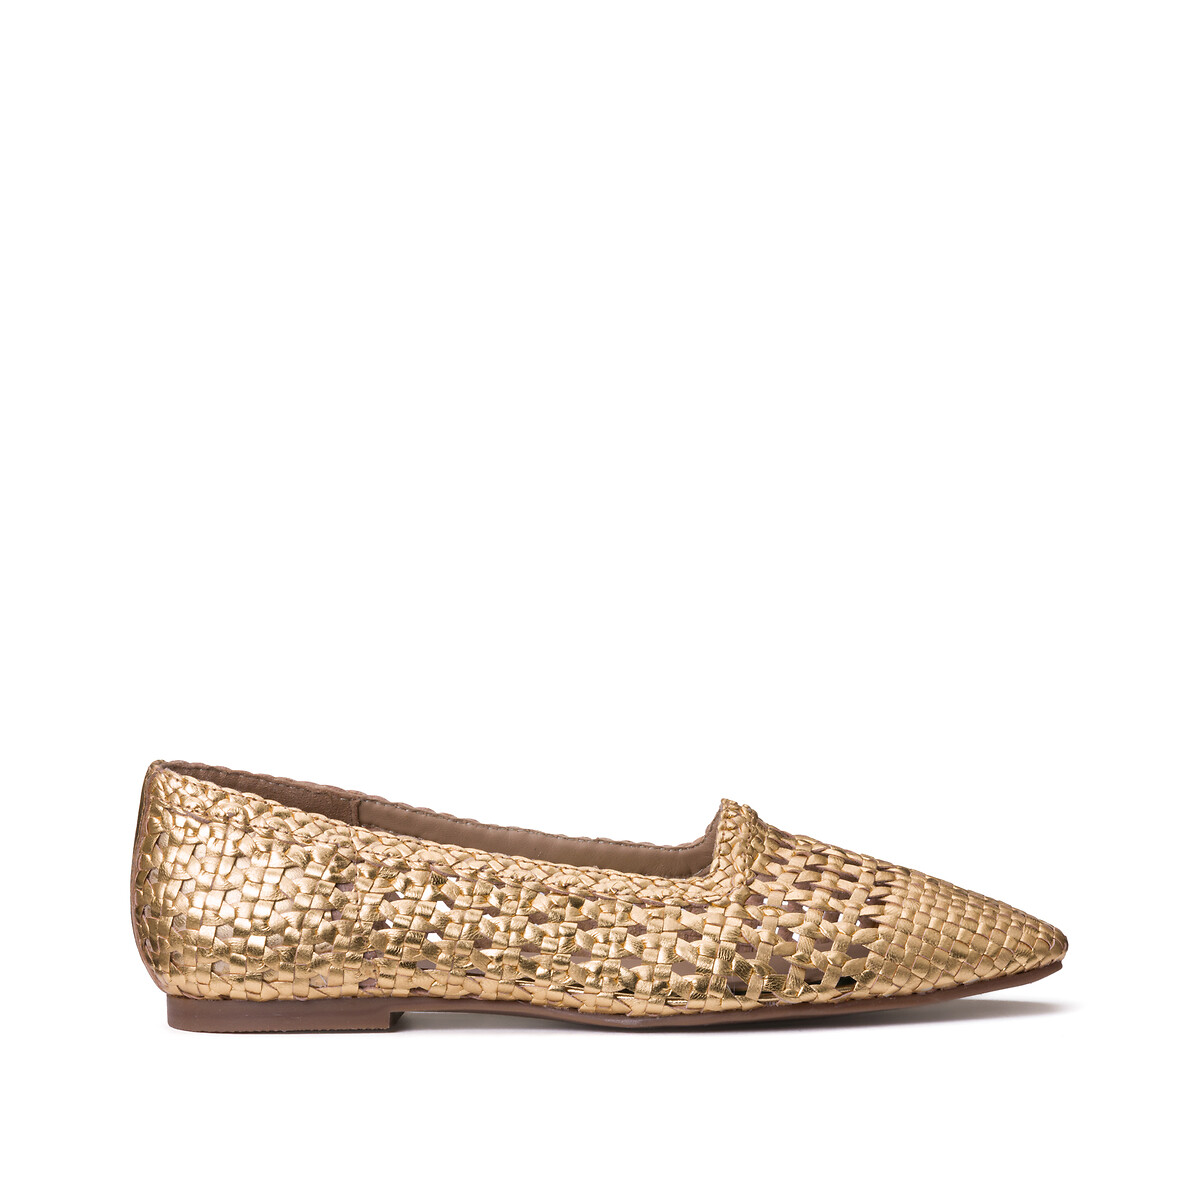 Woven Leather Ballet Flats